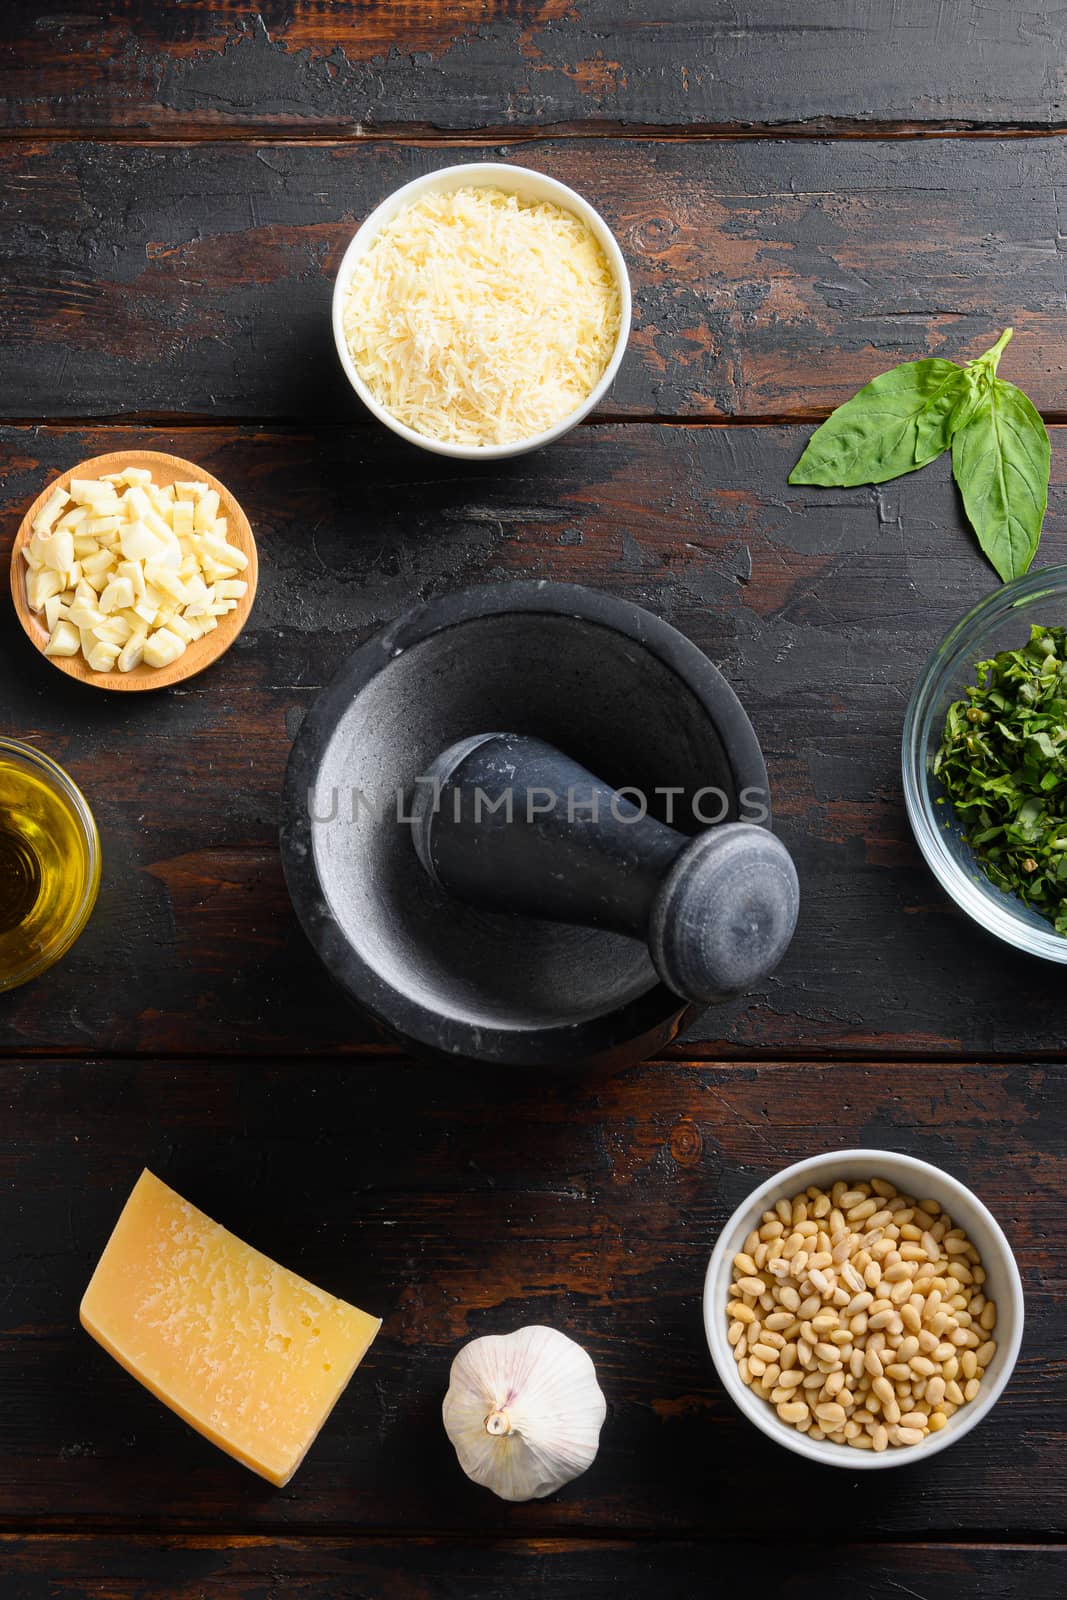 Mortar and Fresh ingredients for pesto genovese sauce Grated parmesan cheese, basil leaves, pine nuts, olive oil, garlic and salt on wood old table top view by Ilianesolenyi